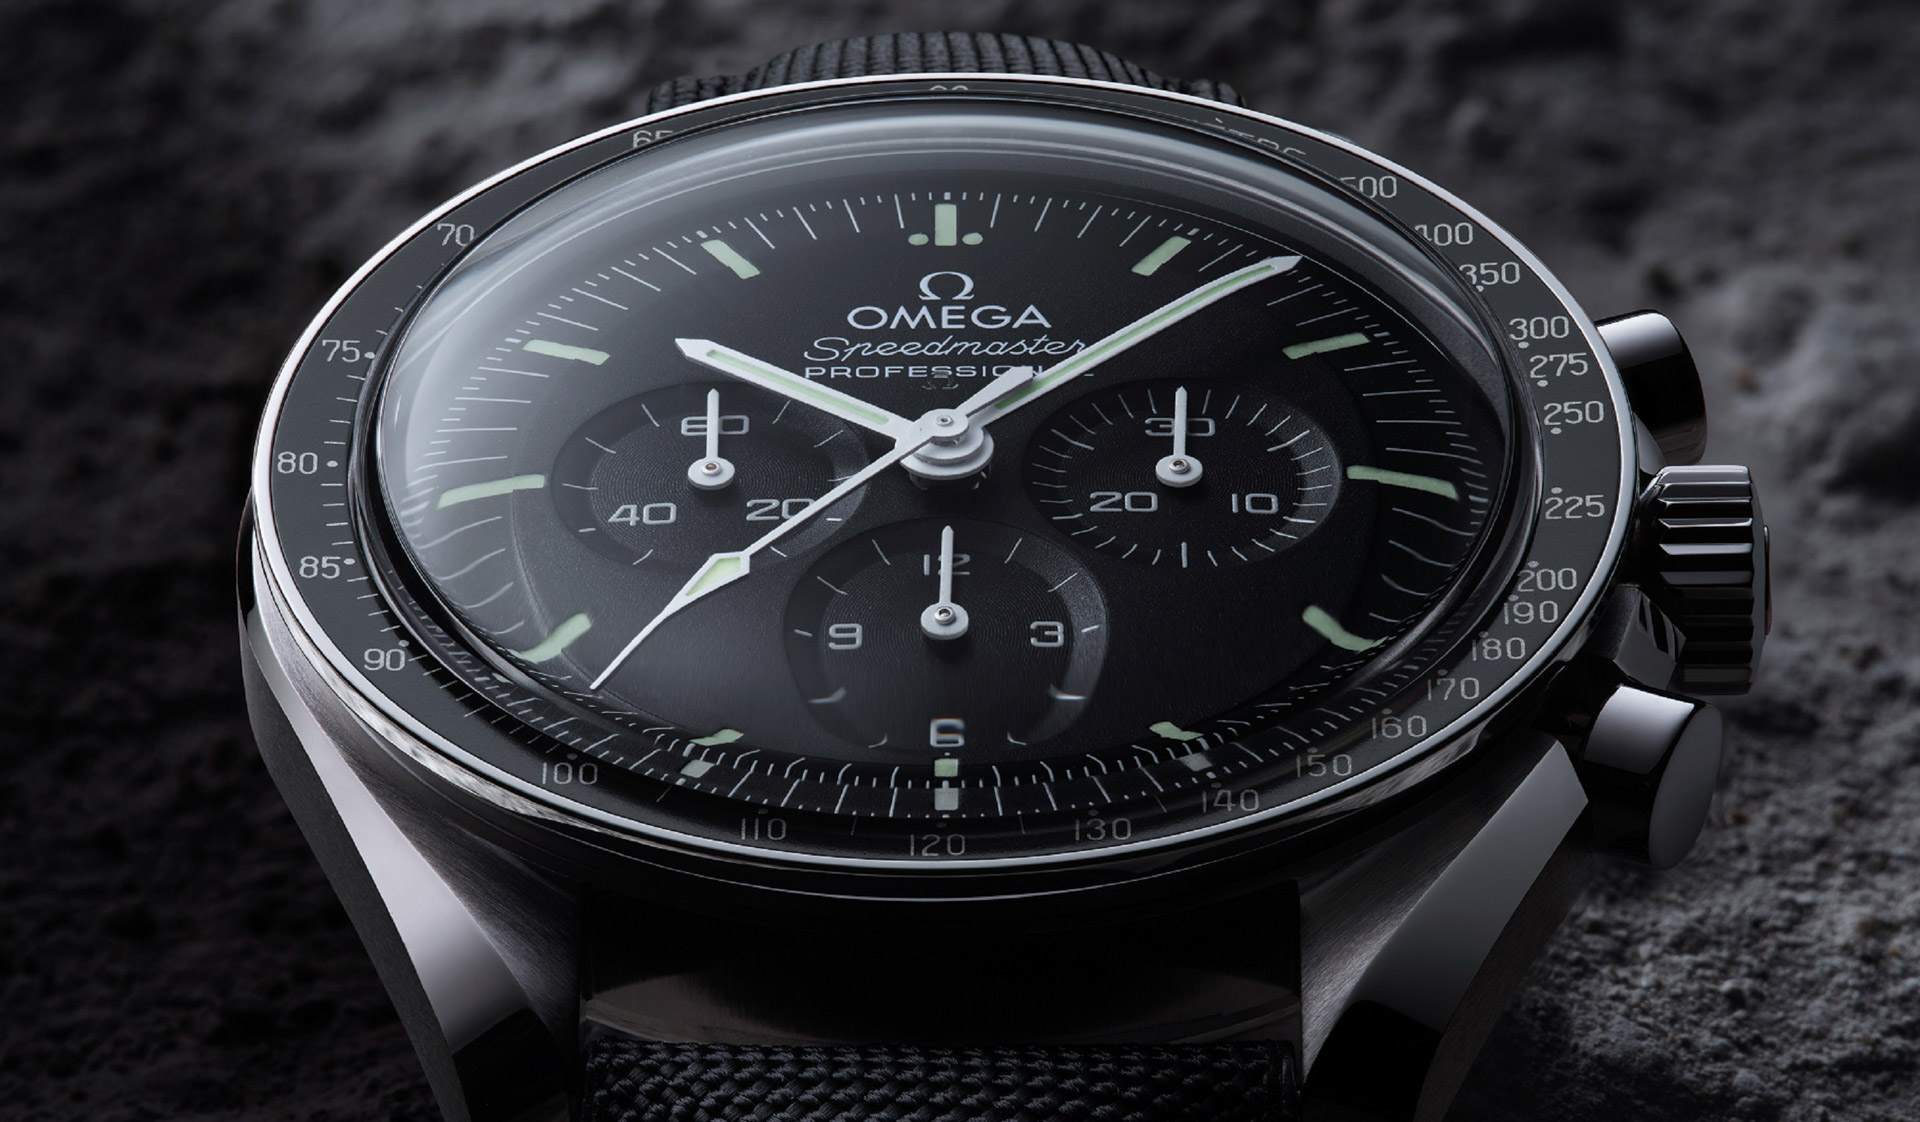 The Next Generation Omega Speedmaster Professional Moonwatch Is Here ...